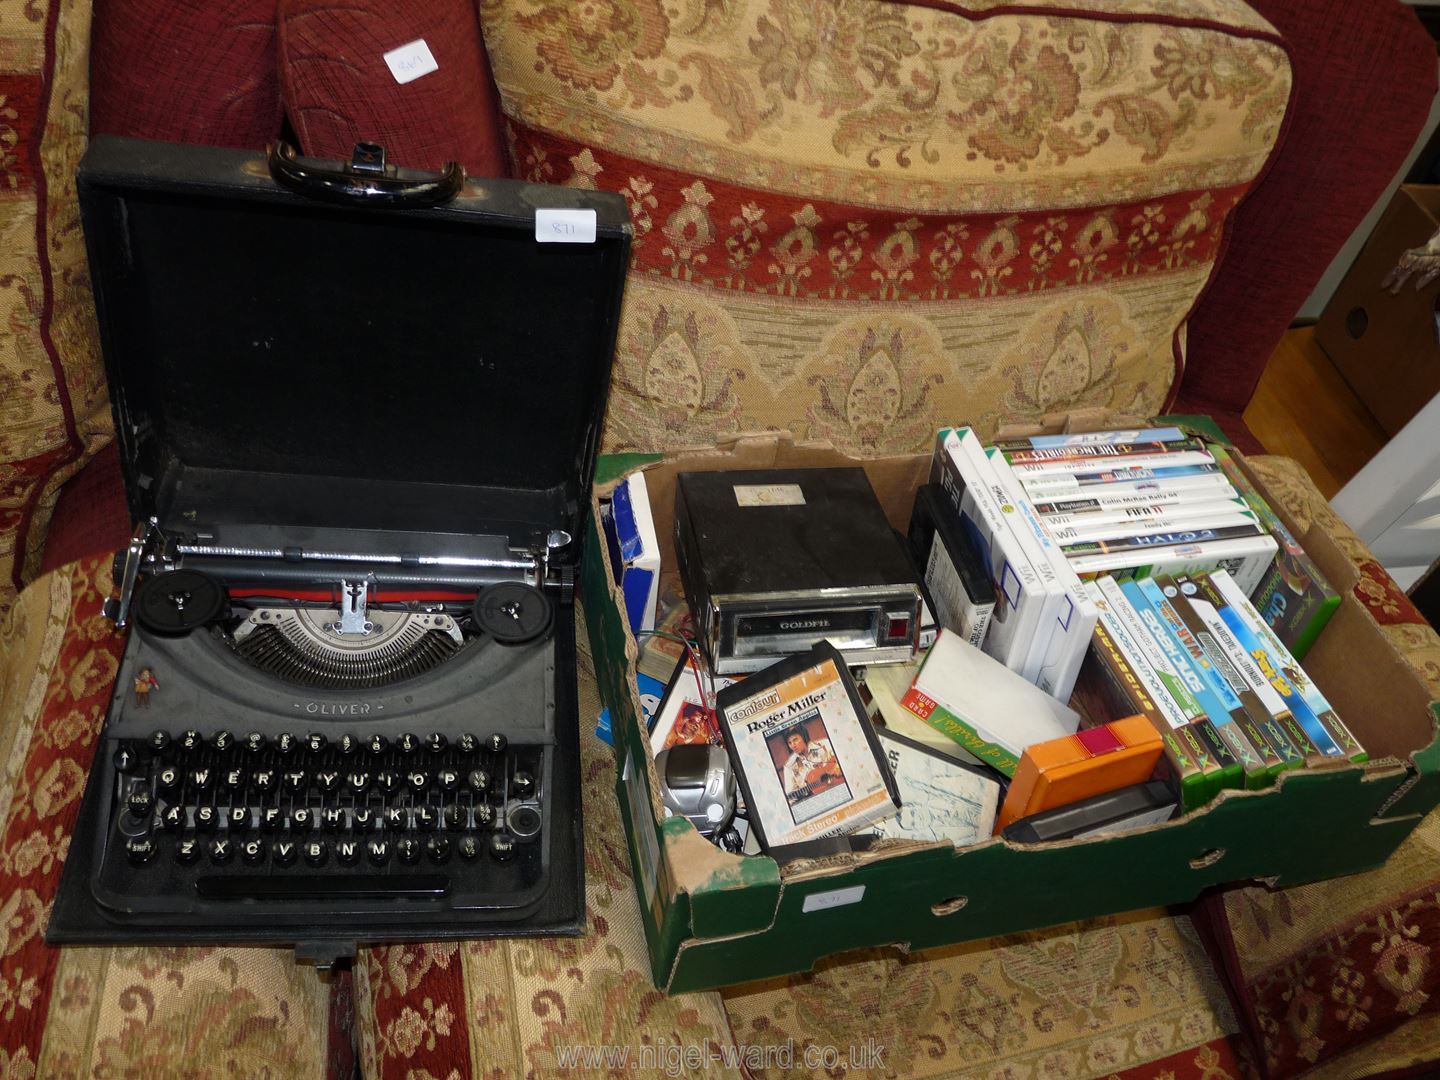 An 'Oliver' typewriter, plus a box of Nintendo Wii and Xbox games, etc.